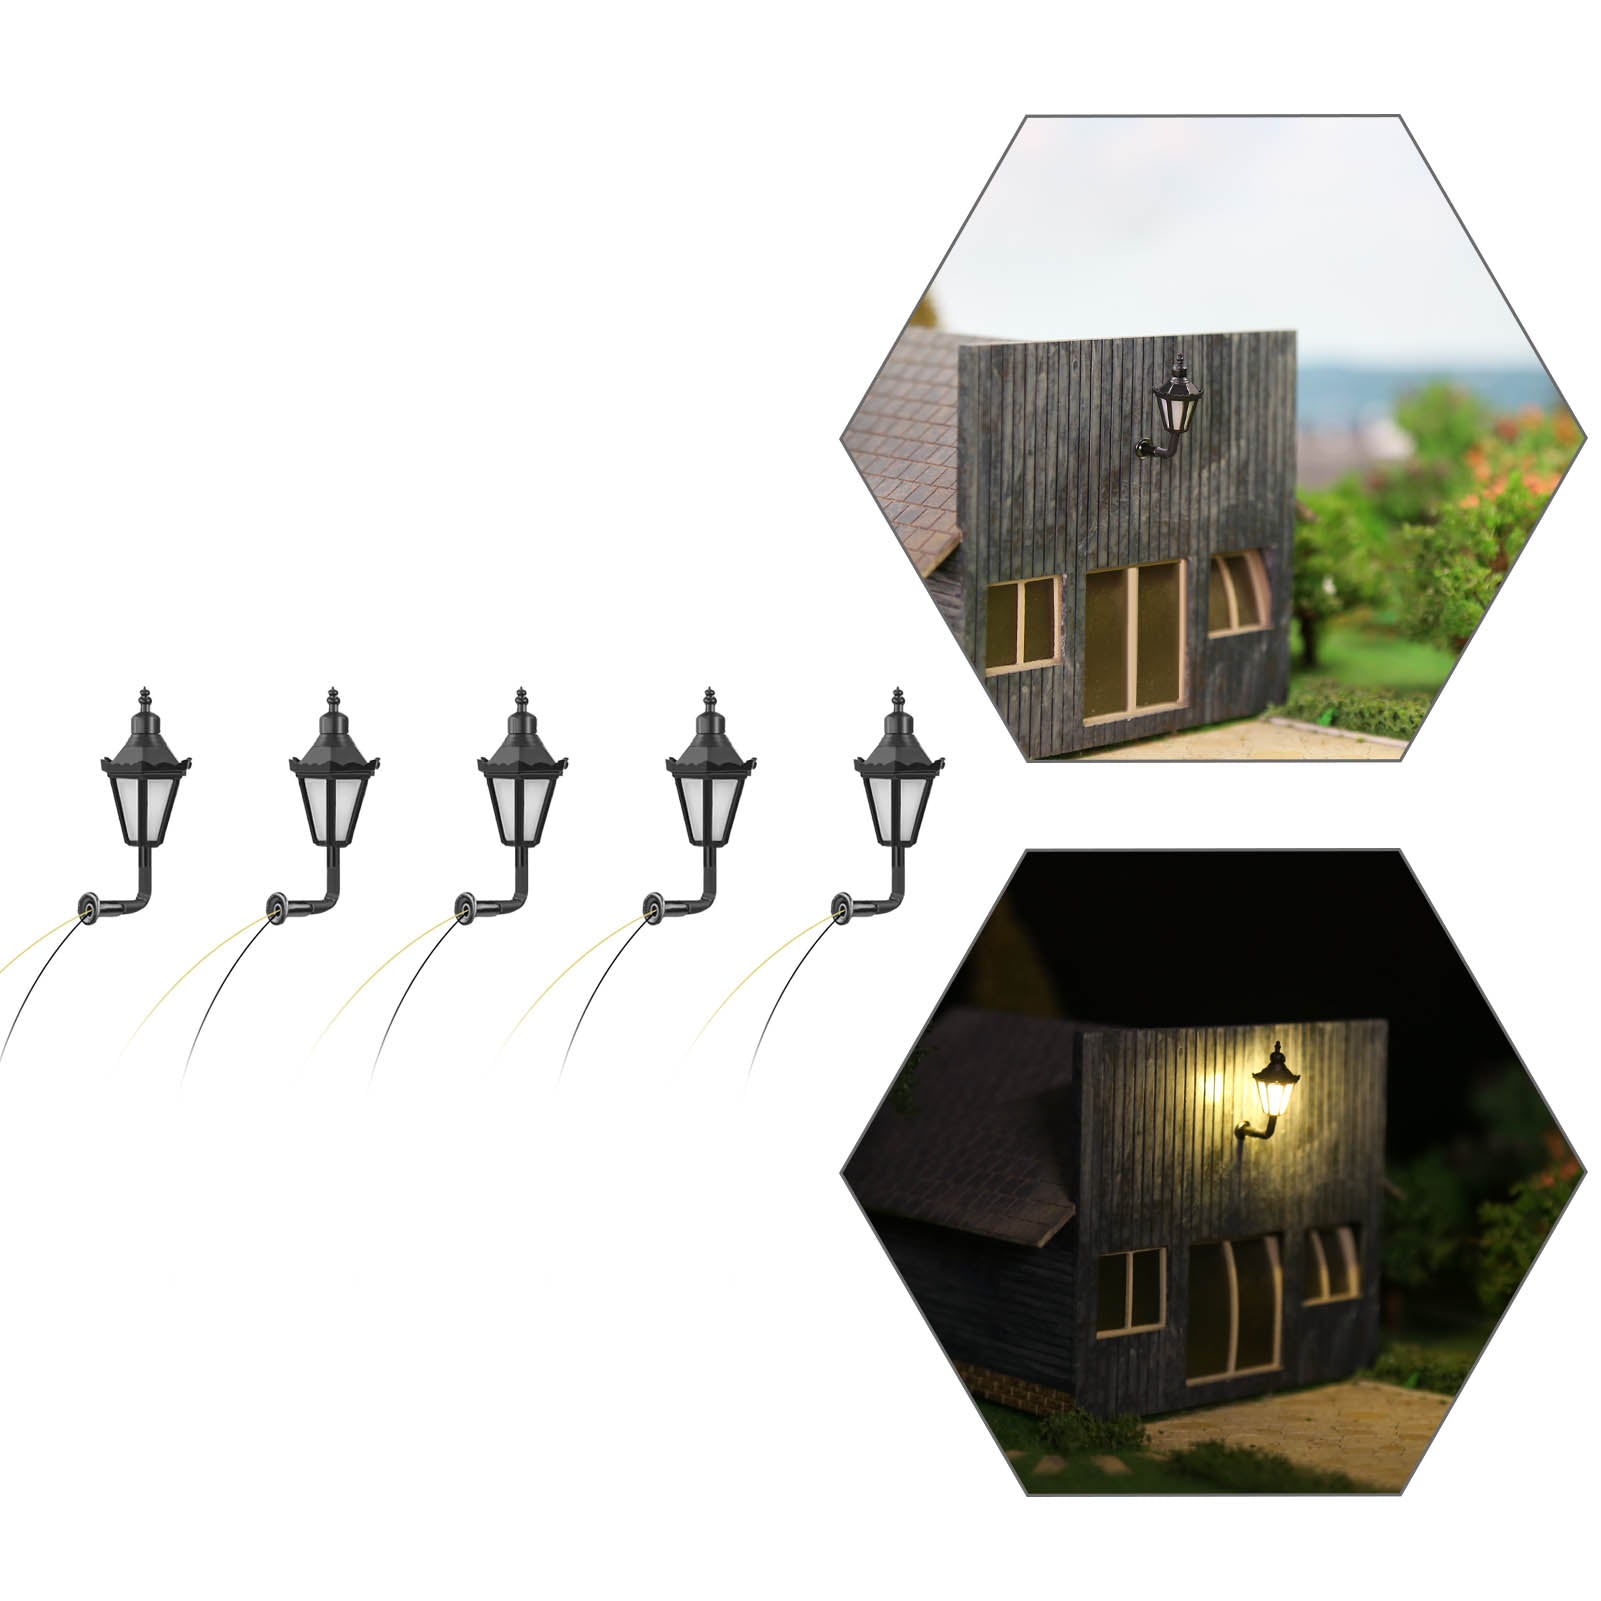 LBD05 5pcs N Scale 1:160 Hanging Lamps Wall Lights